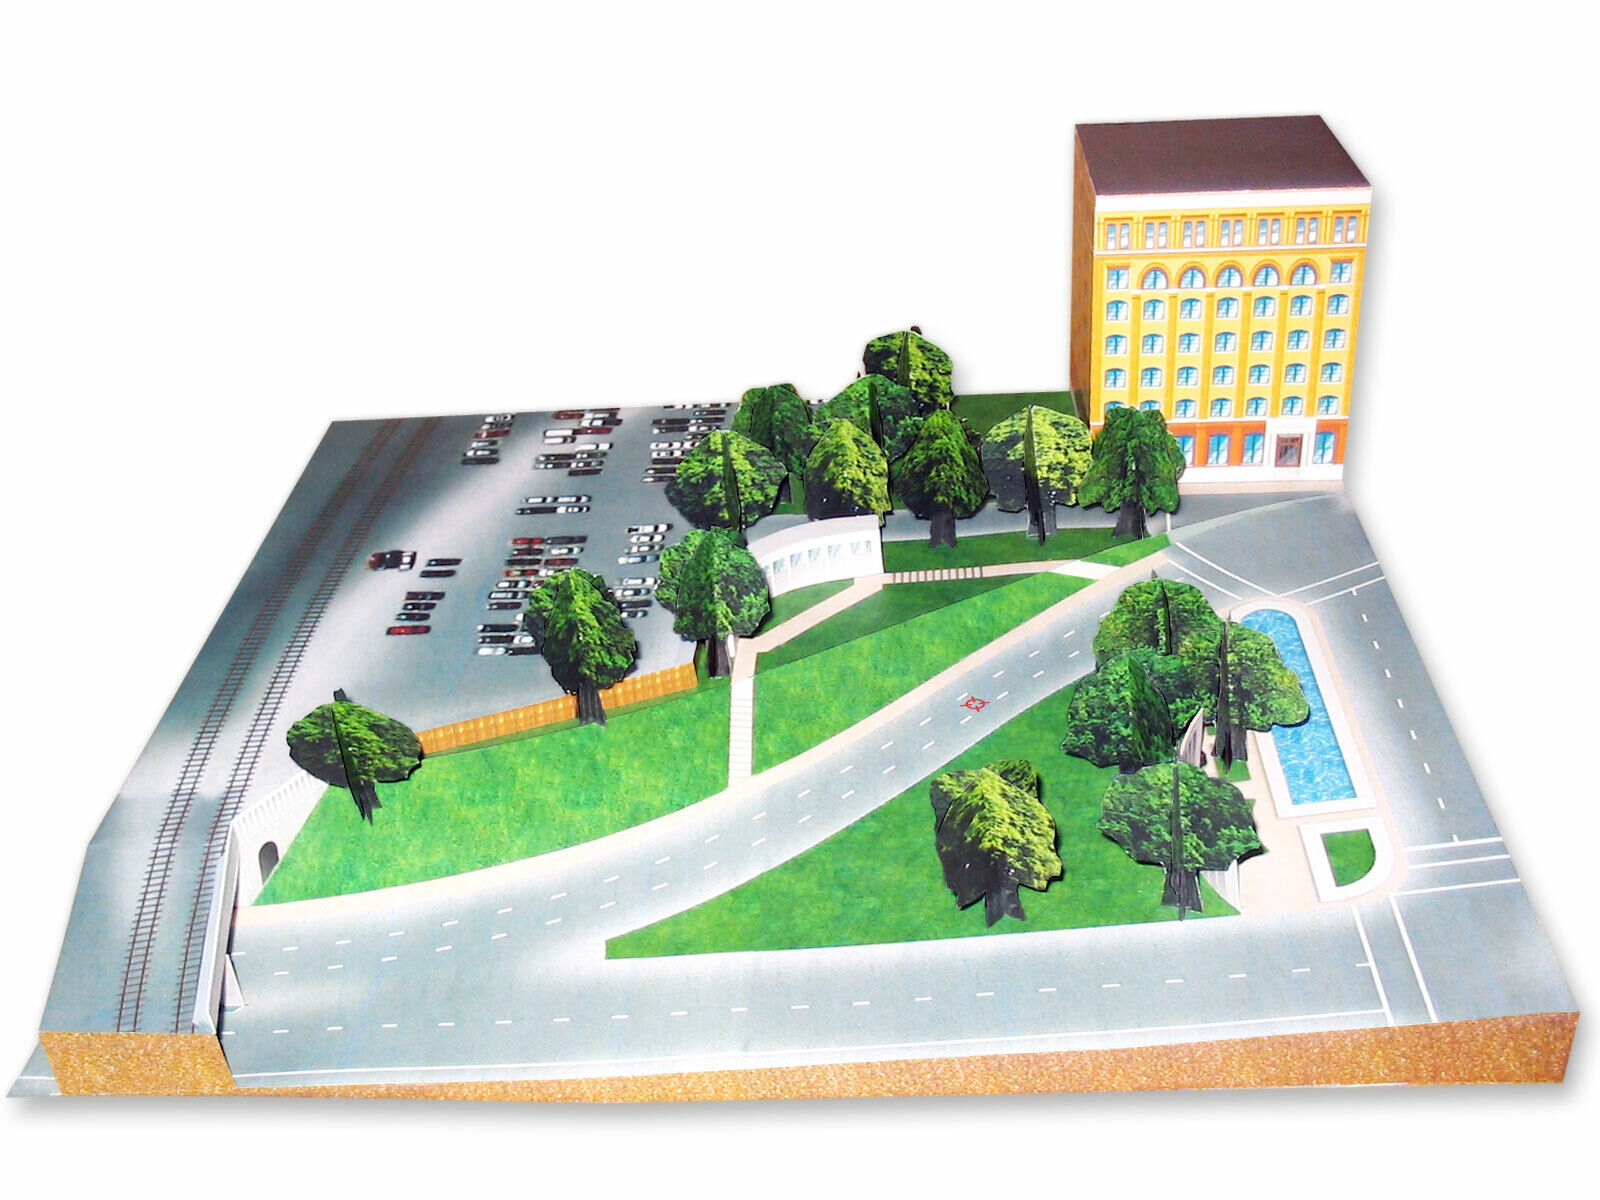 Dealy Plaza - Dallas, TX - President Kennedy Assassination - Paper Model Project